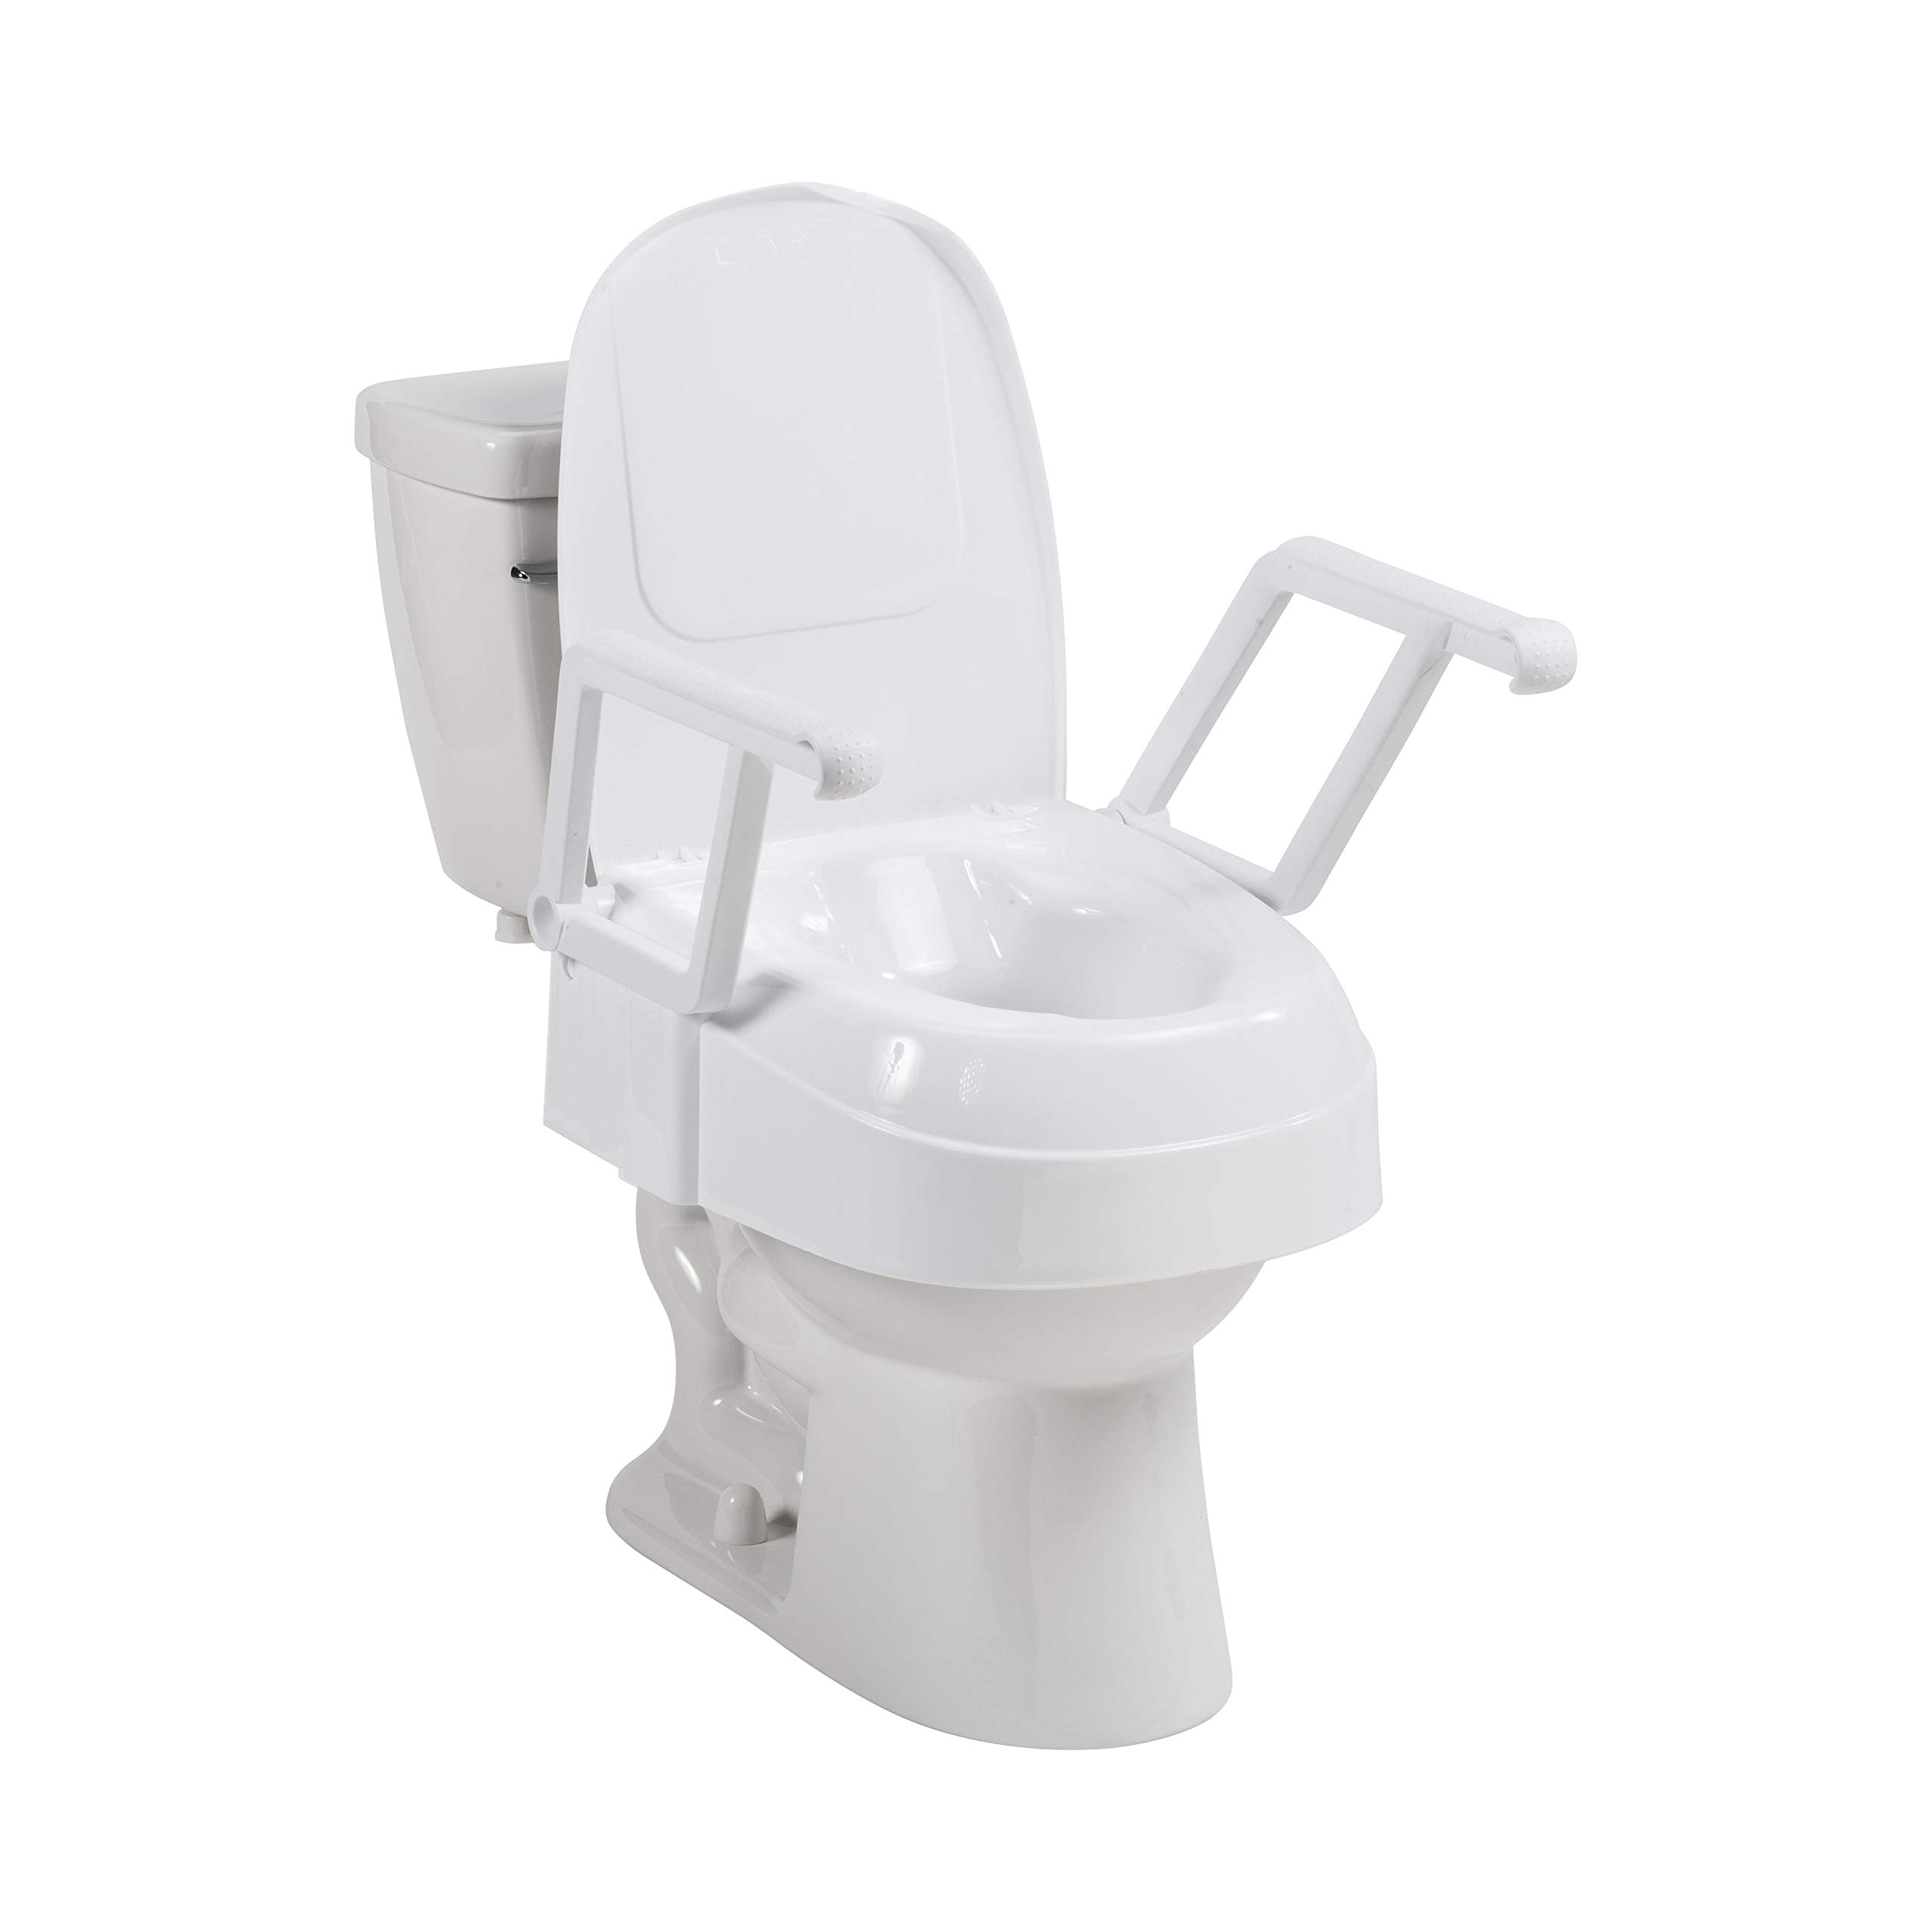 Drive Medical PreserveTech Universal Raised Toilet Seat With Handles, White